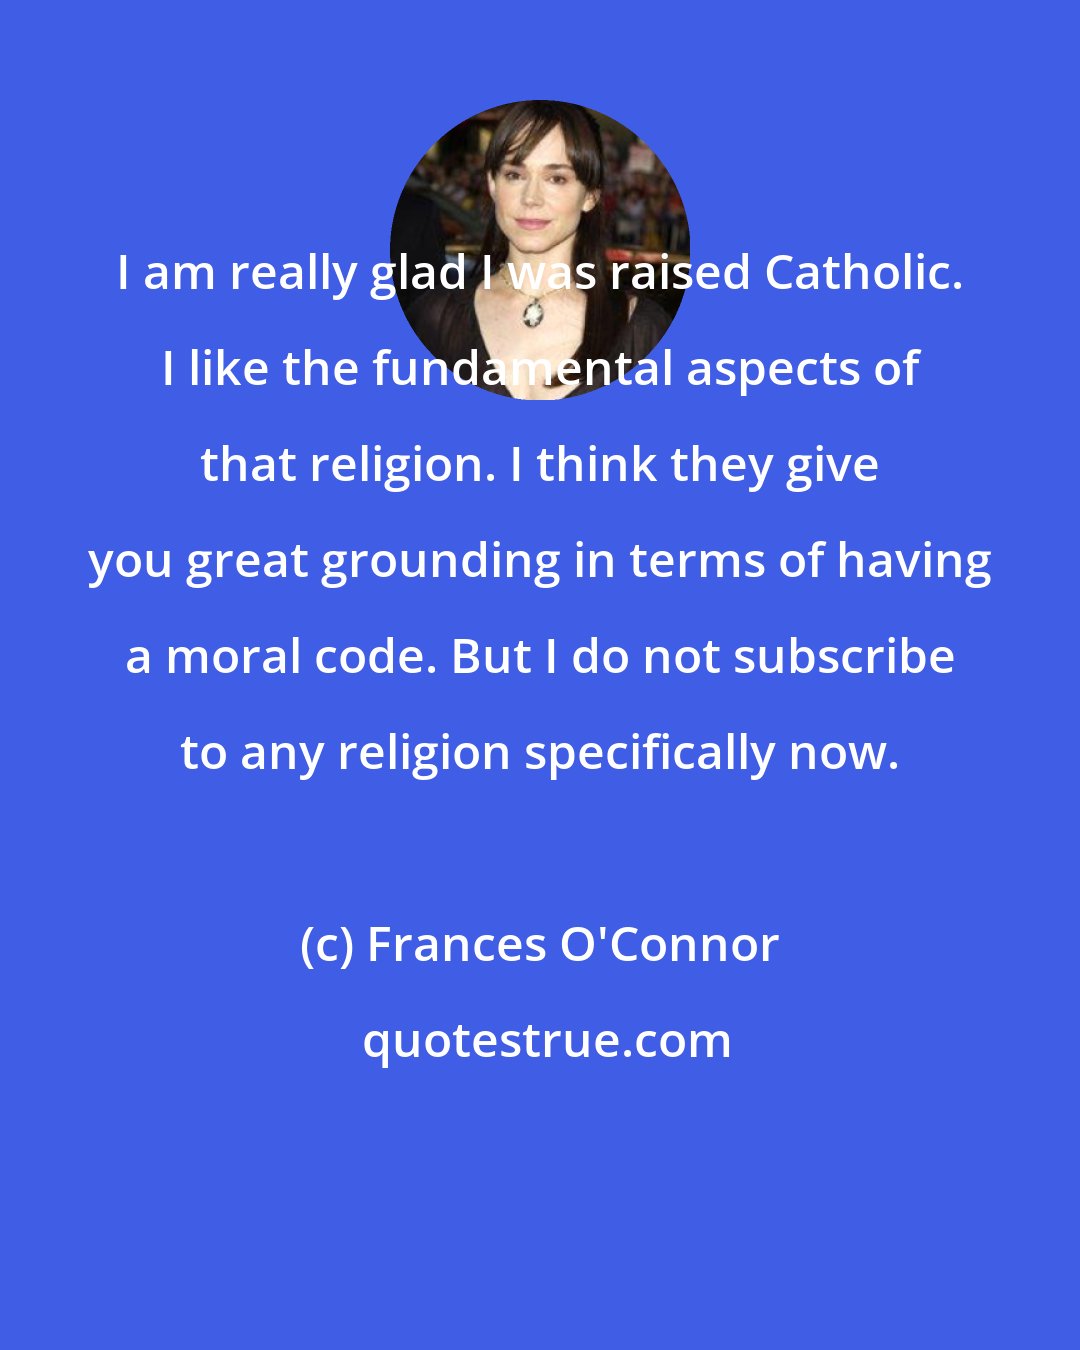 Frances O'Connor: I am really glad I was raised Catholic. I like the fundamental aspects of that religion. I think they give you great grounding in terms of having a moral code. But I do not subscribe to any religion specifically now.